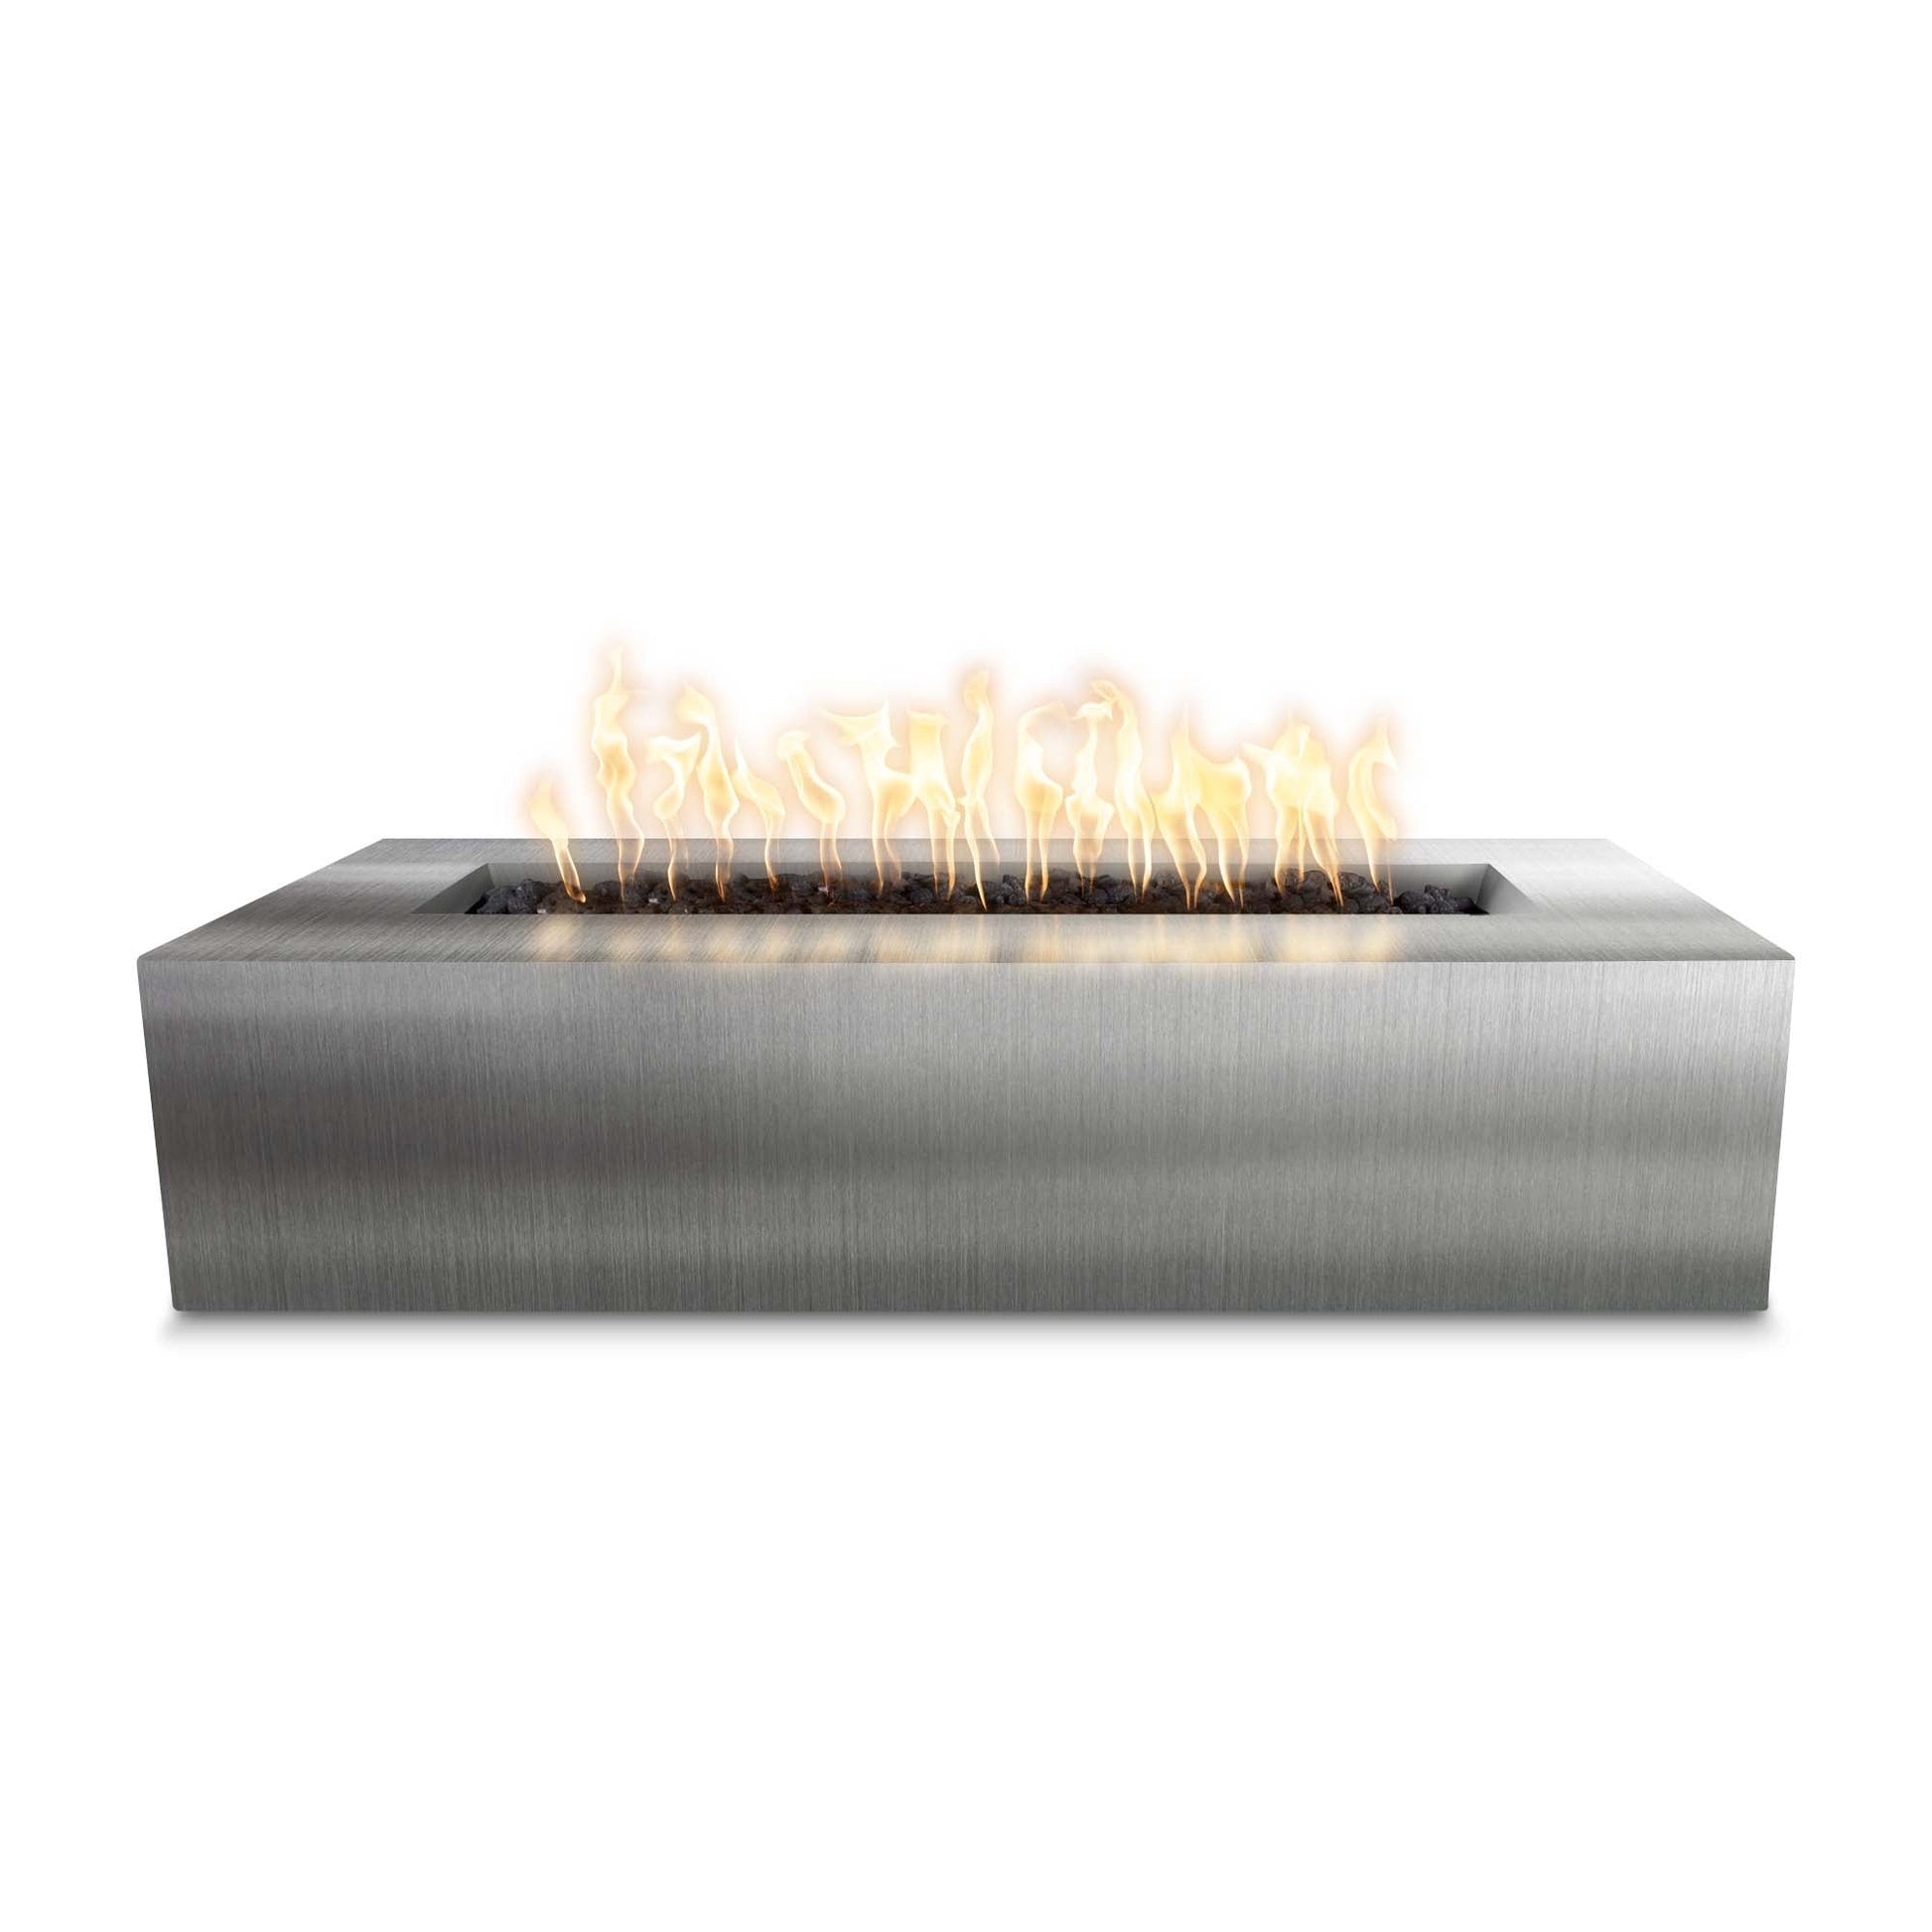 The Outdoor Plus Rectangular Regal 60" Stainless Steel Natural Gas Fire Pit with 12V Electronic Ignition